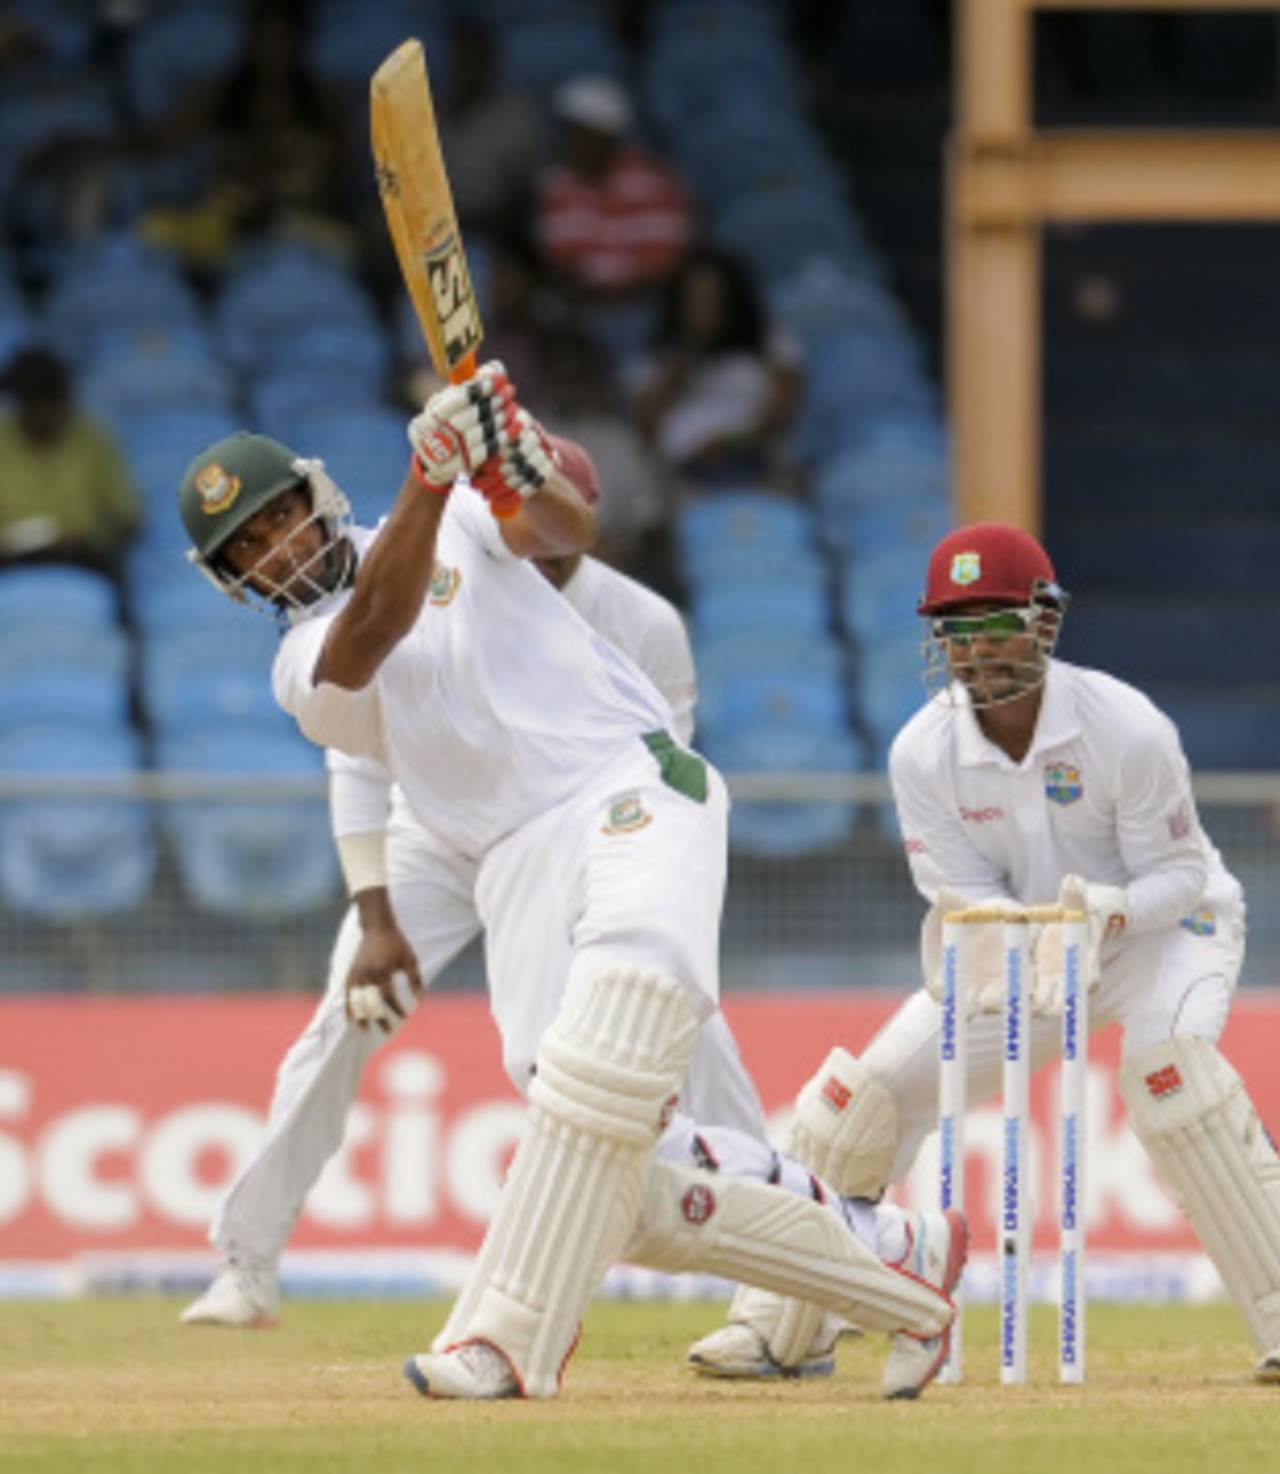 Mahmudullah hit one six during his fifty, West Indies v Bangladesh, 1st Test, St Vincent, 4th day, September 8, 2014